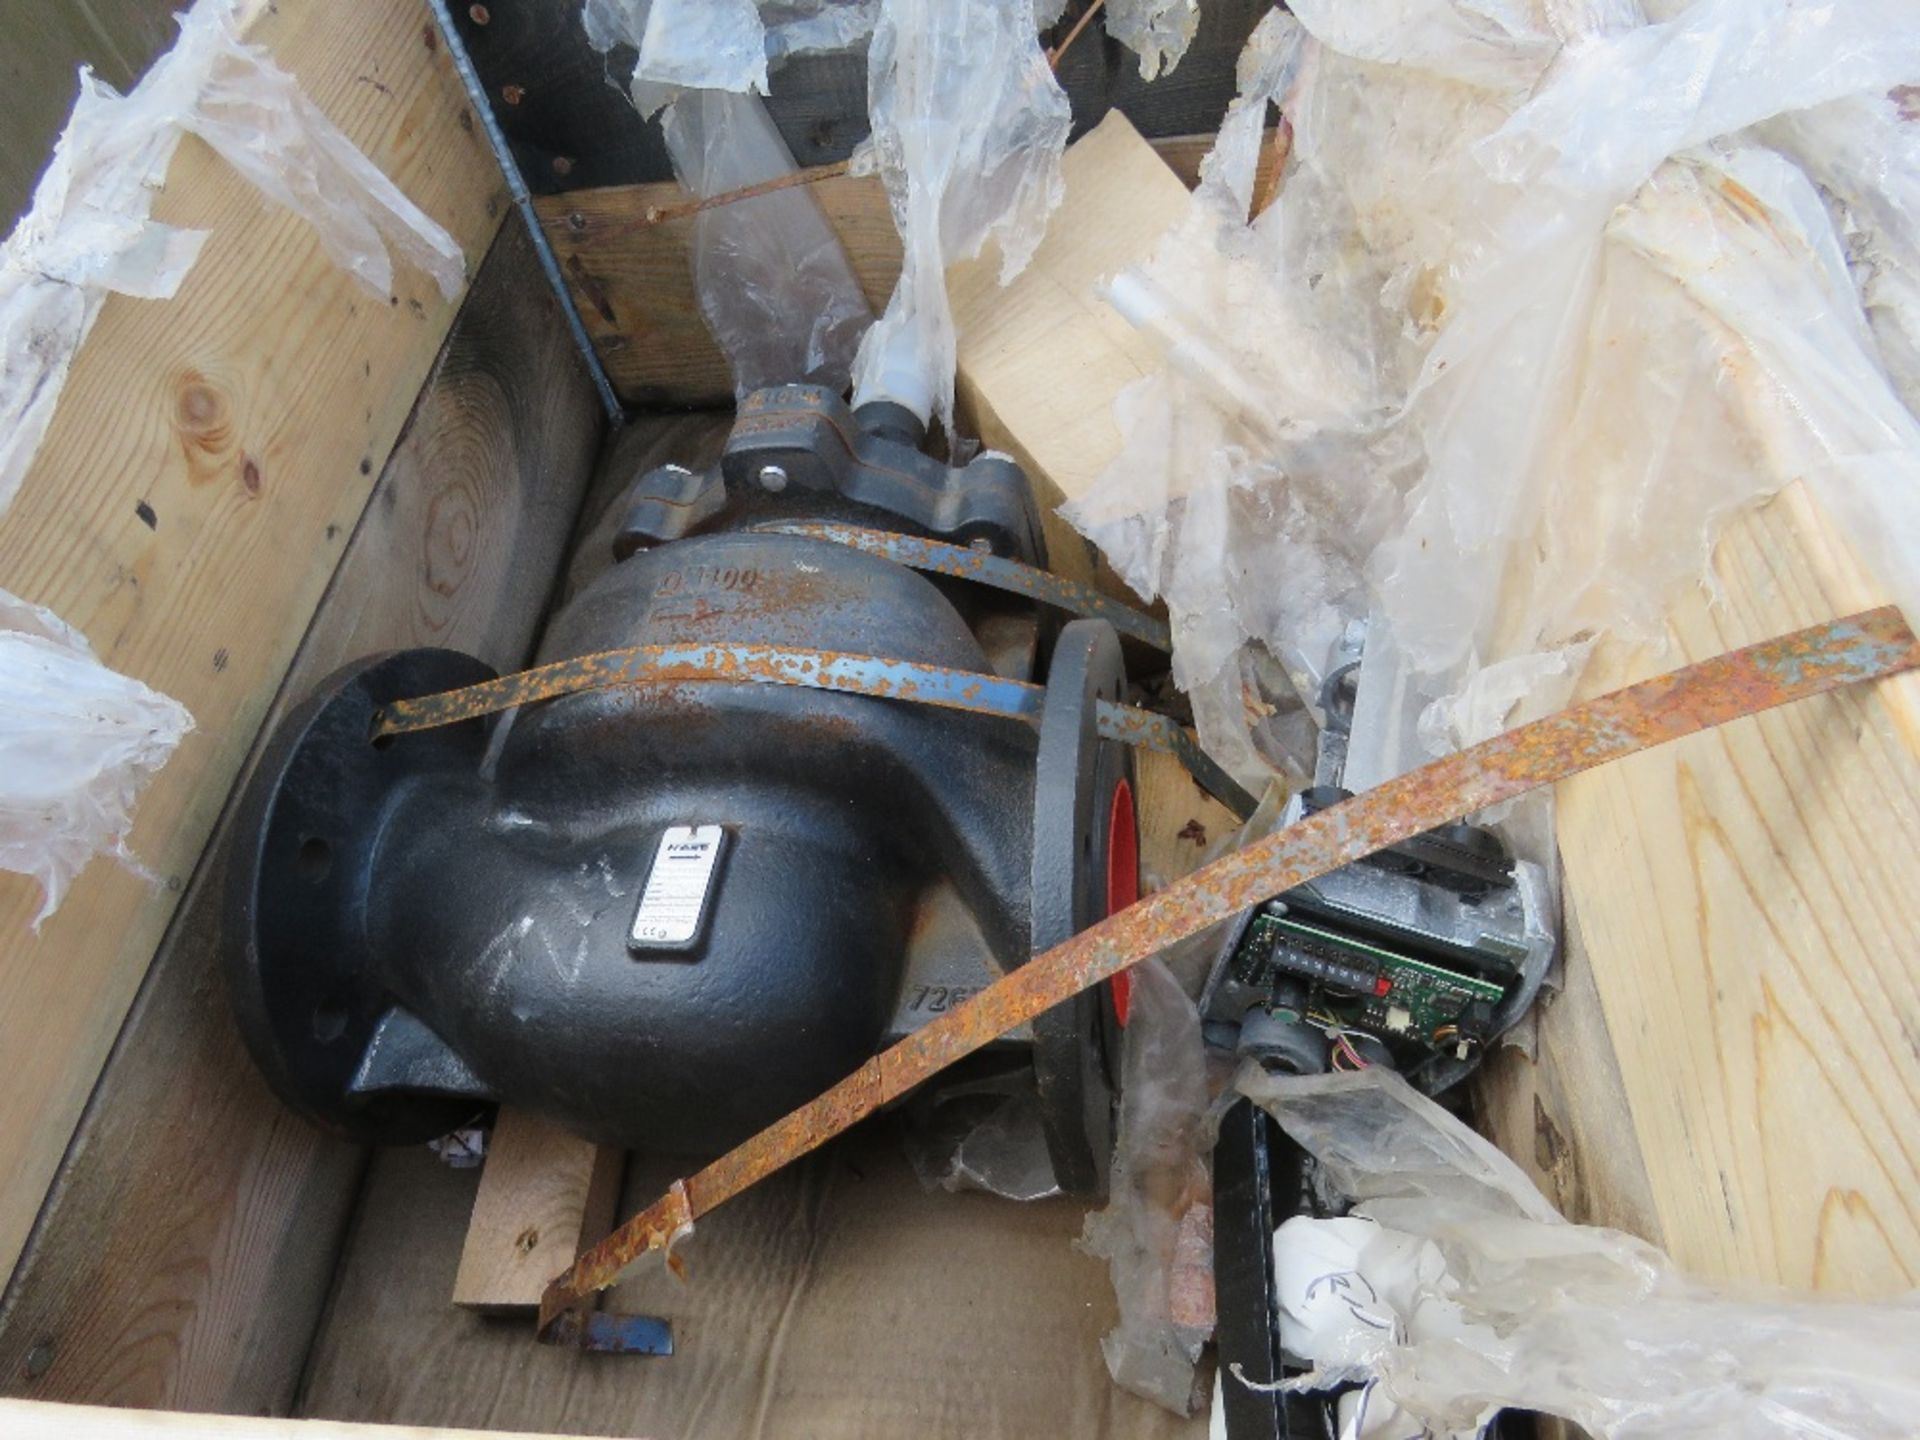 2 X LARGE FRESE 53-1203 GATE VALVES, BOXED, UNUSED. SOURCED FROM LARGE SCALE COMPANY LIQUIDATION. - Image 3 of 6